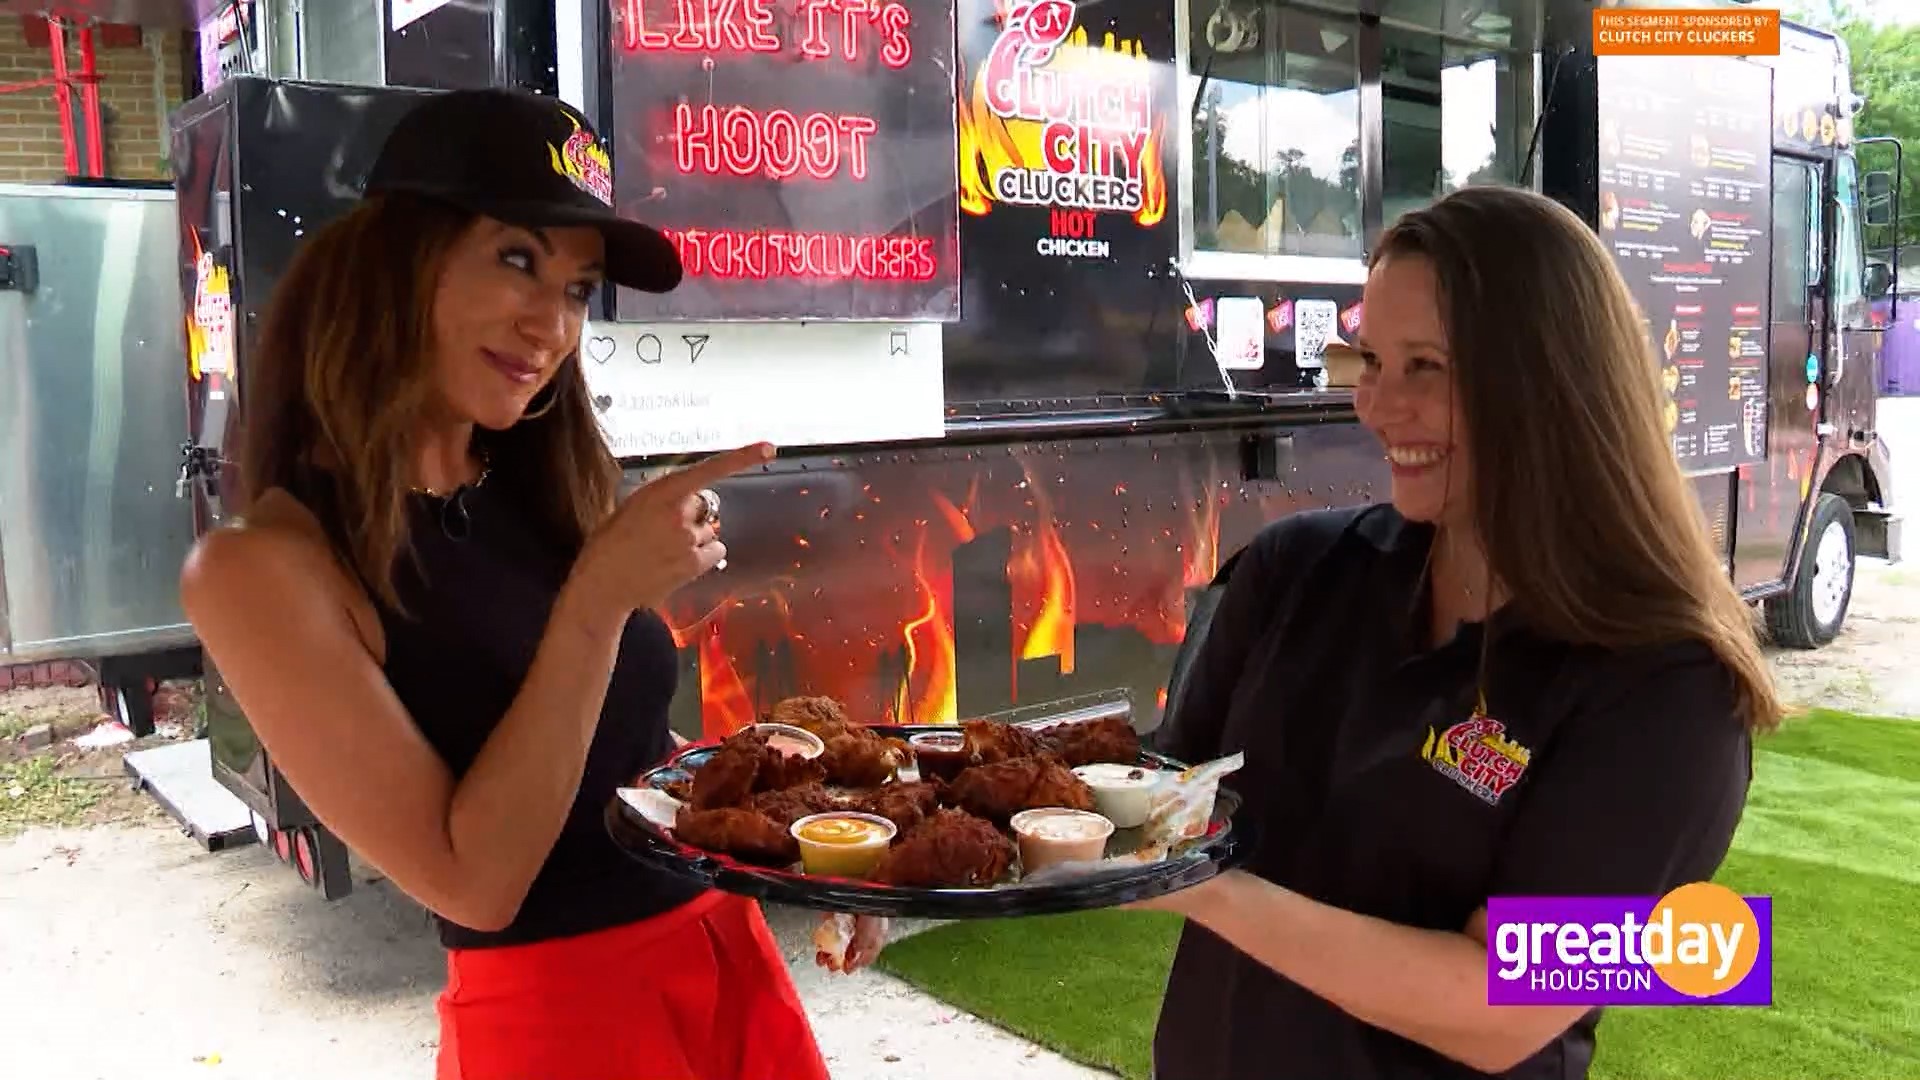 Great Day's Cristina Kooker slices and dices with Houston's flashiest food truck serving up the best chicken tenders, sandwiches, loaded fries and more!